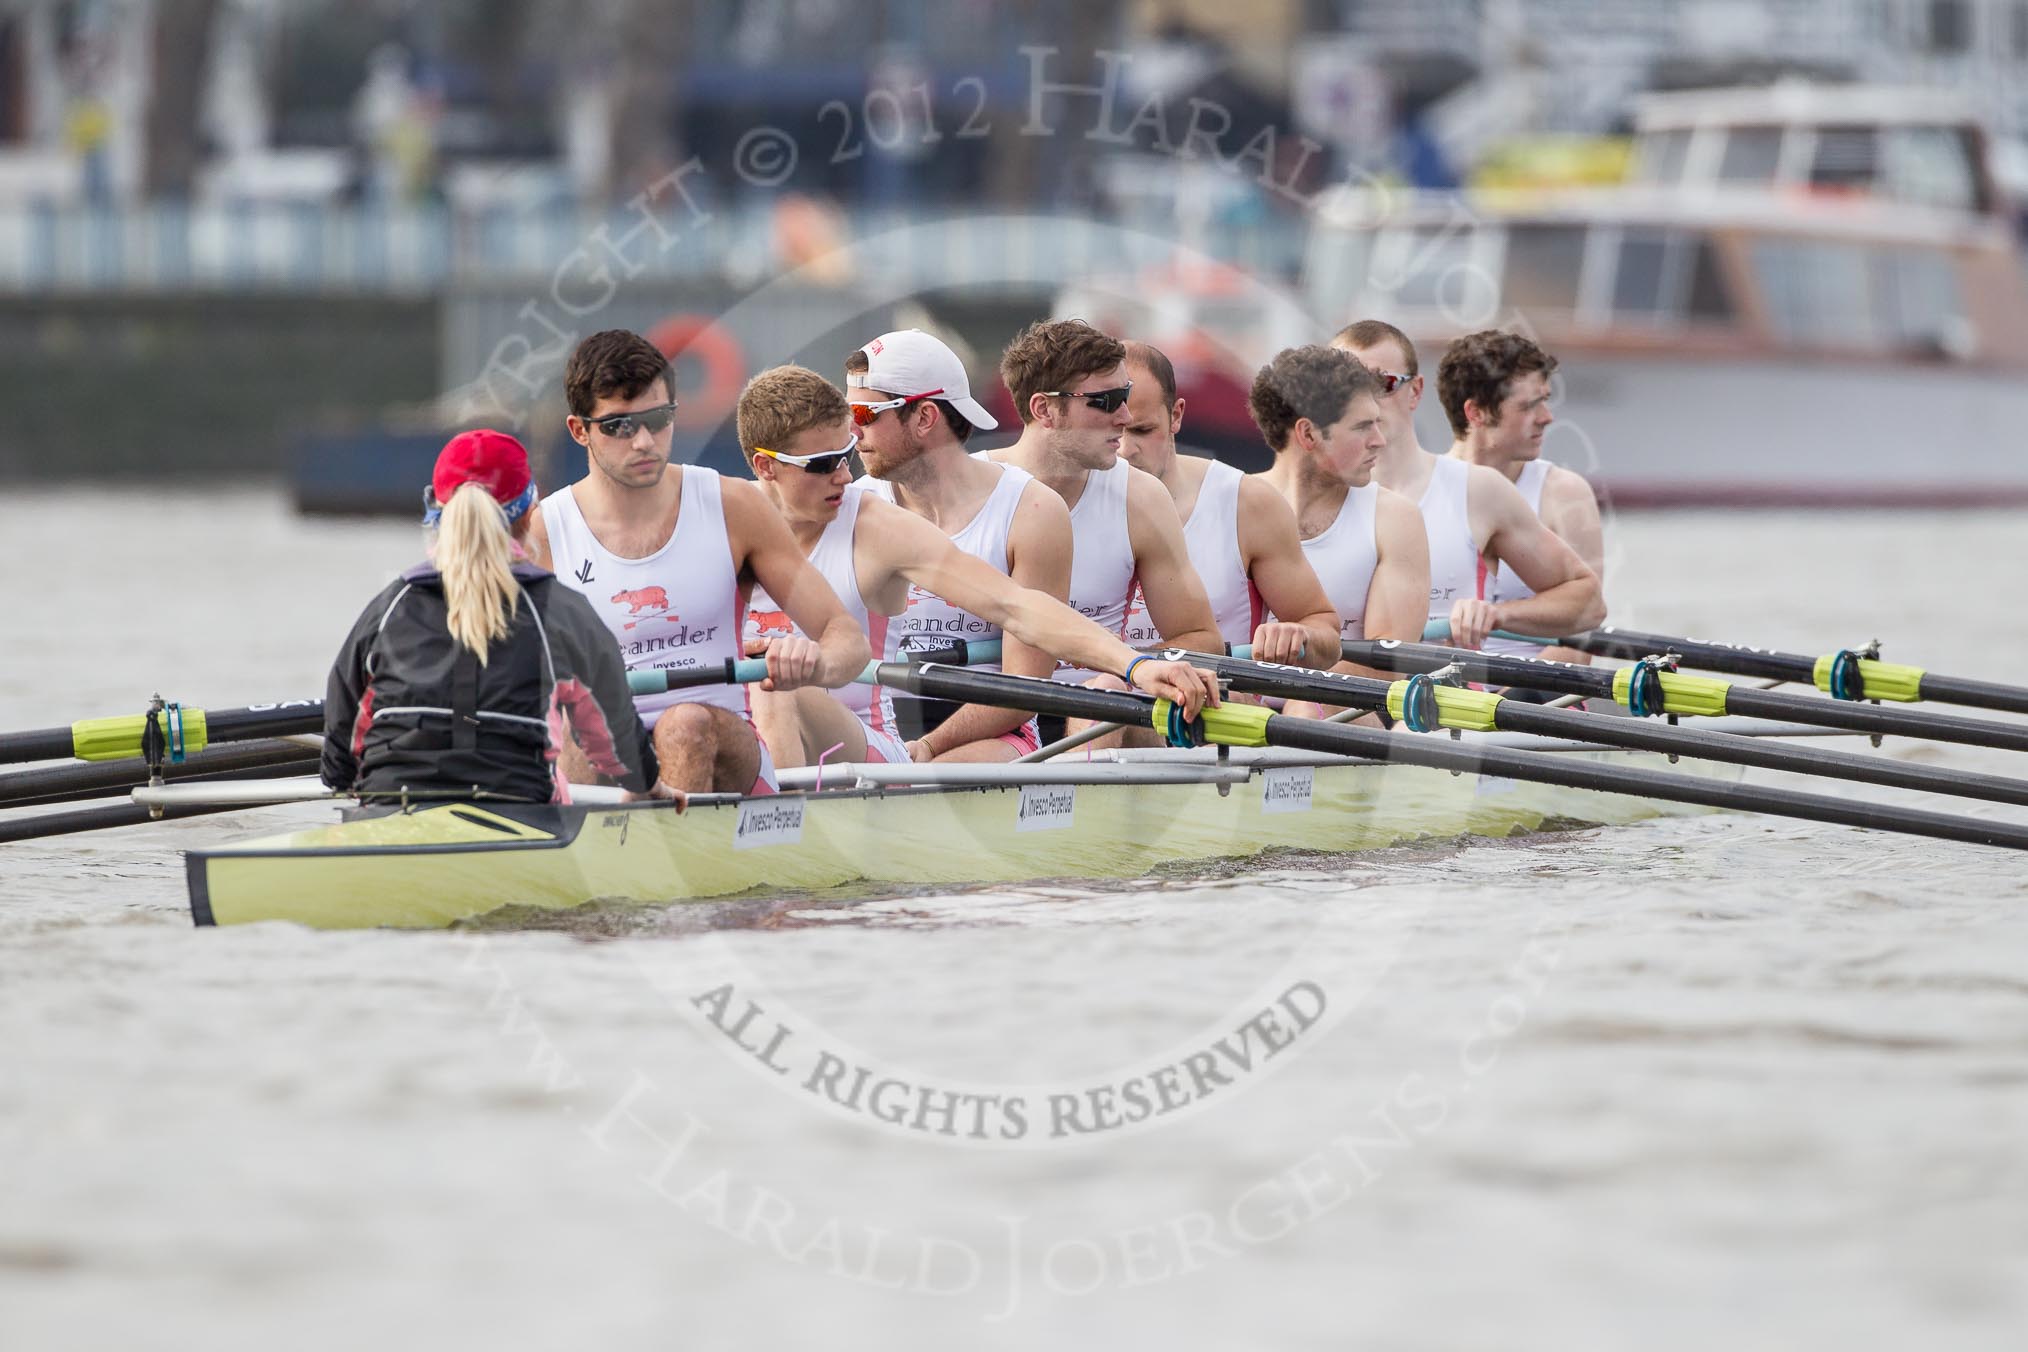 The Boat Race season 2012 - fixture CUBC vs Leander: The Leander Club Eight preparing for the start of the race. Cox Katie Klavenes, stroke Vasillis Ragoussis, Cameron MacRitchie, Sean Dixon, Tom Clark, John Clay, Will Gray, Sam Whittaker, and bow Oliver Holt..
River Thames between Putney and Molesey,
London,
Greater London,
United Kingdom,
on 10 March 2012 at 14:12, image #92